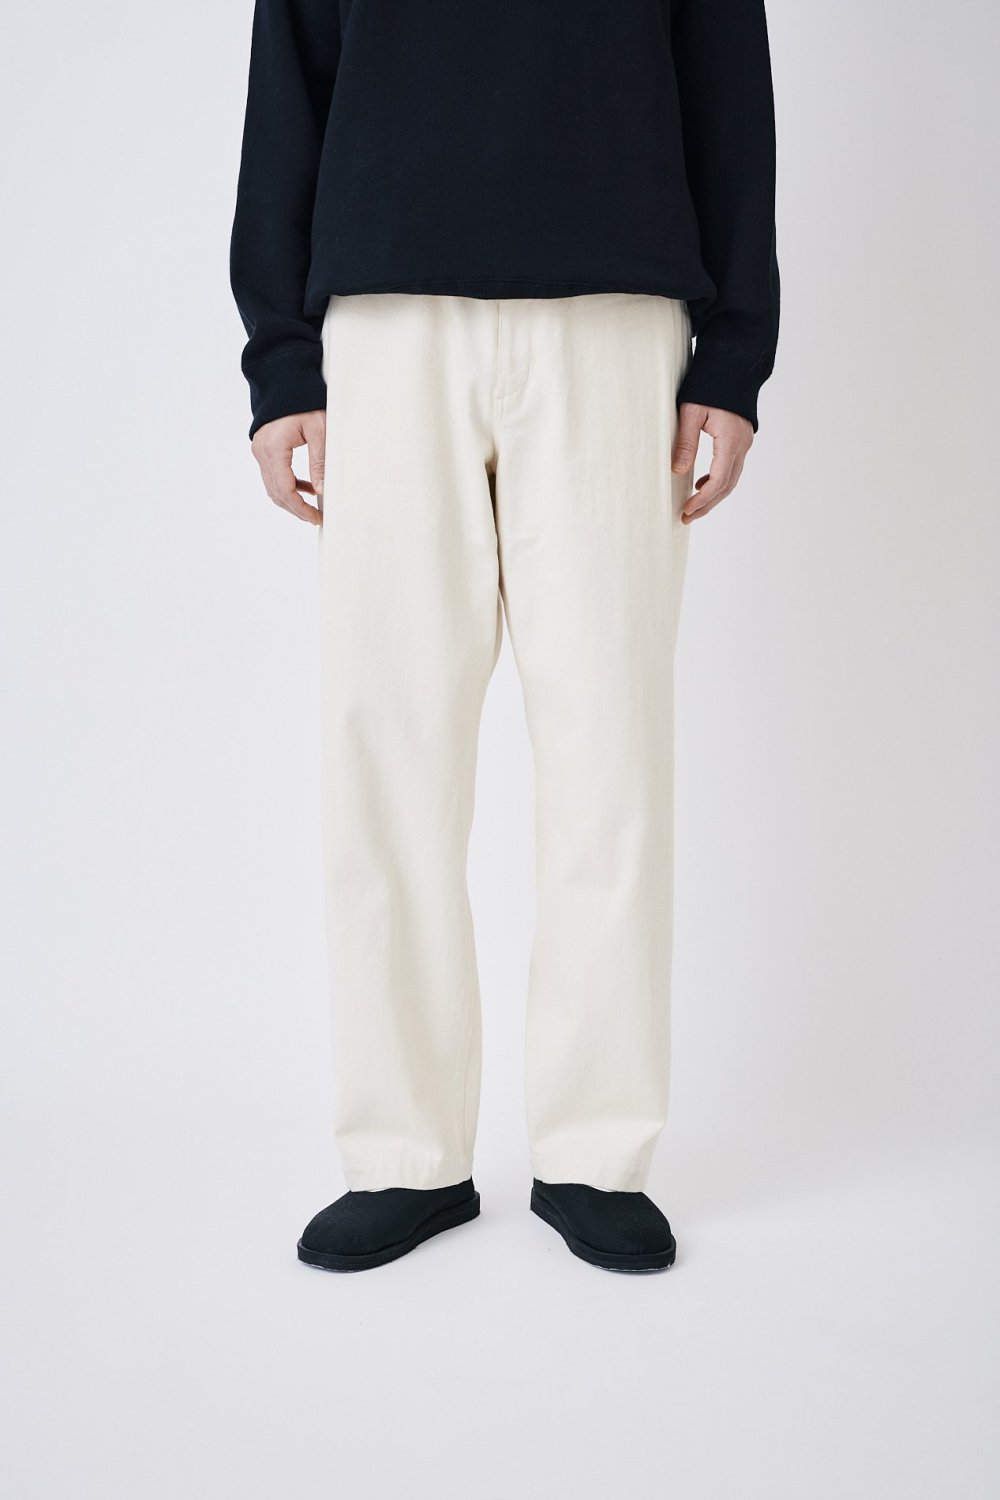 organic cotton denim pants (natural) - Information minami aoyama - online  shop : clothes and objects｜インフォメーション - 南青山 : 服とオブジェ